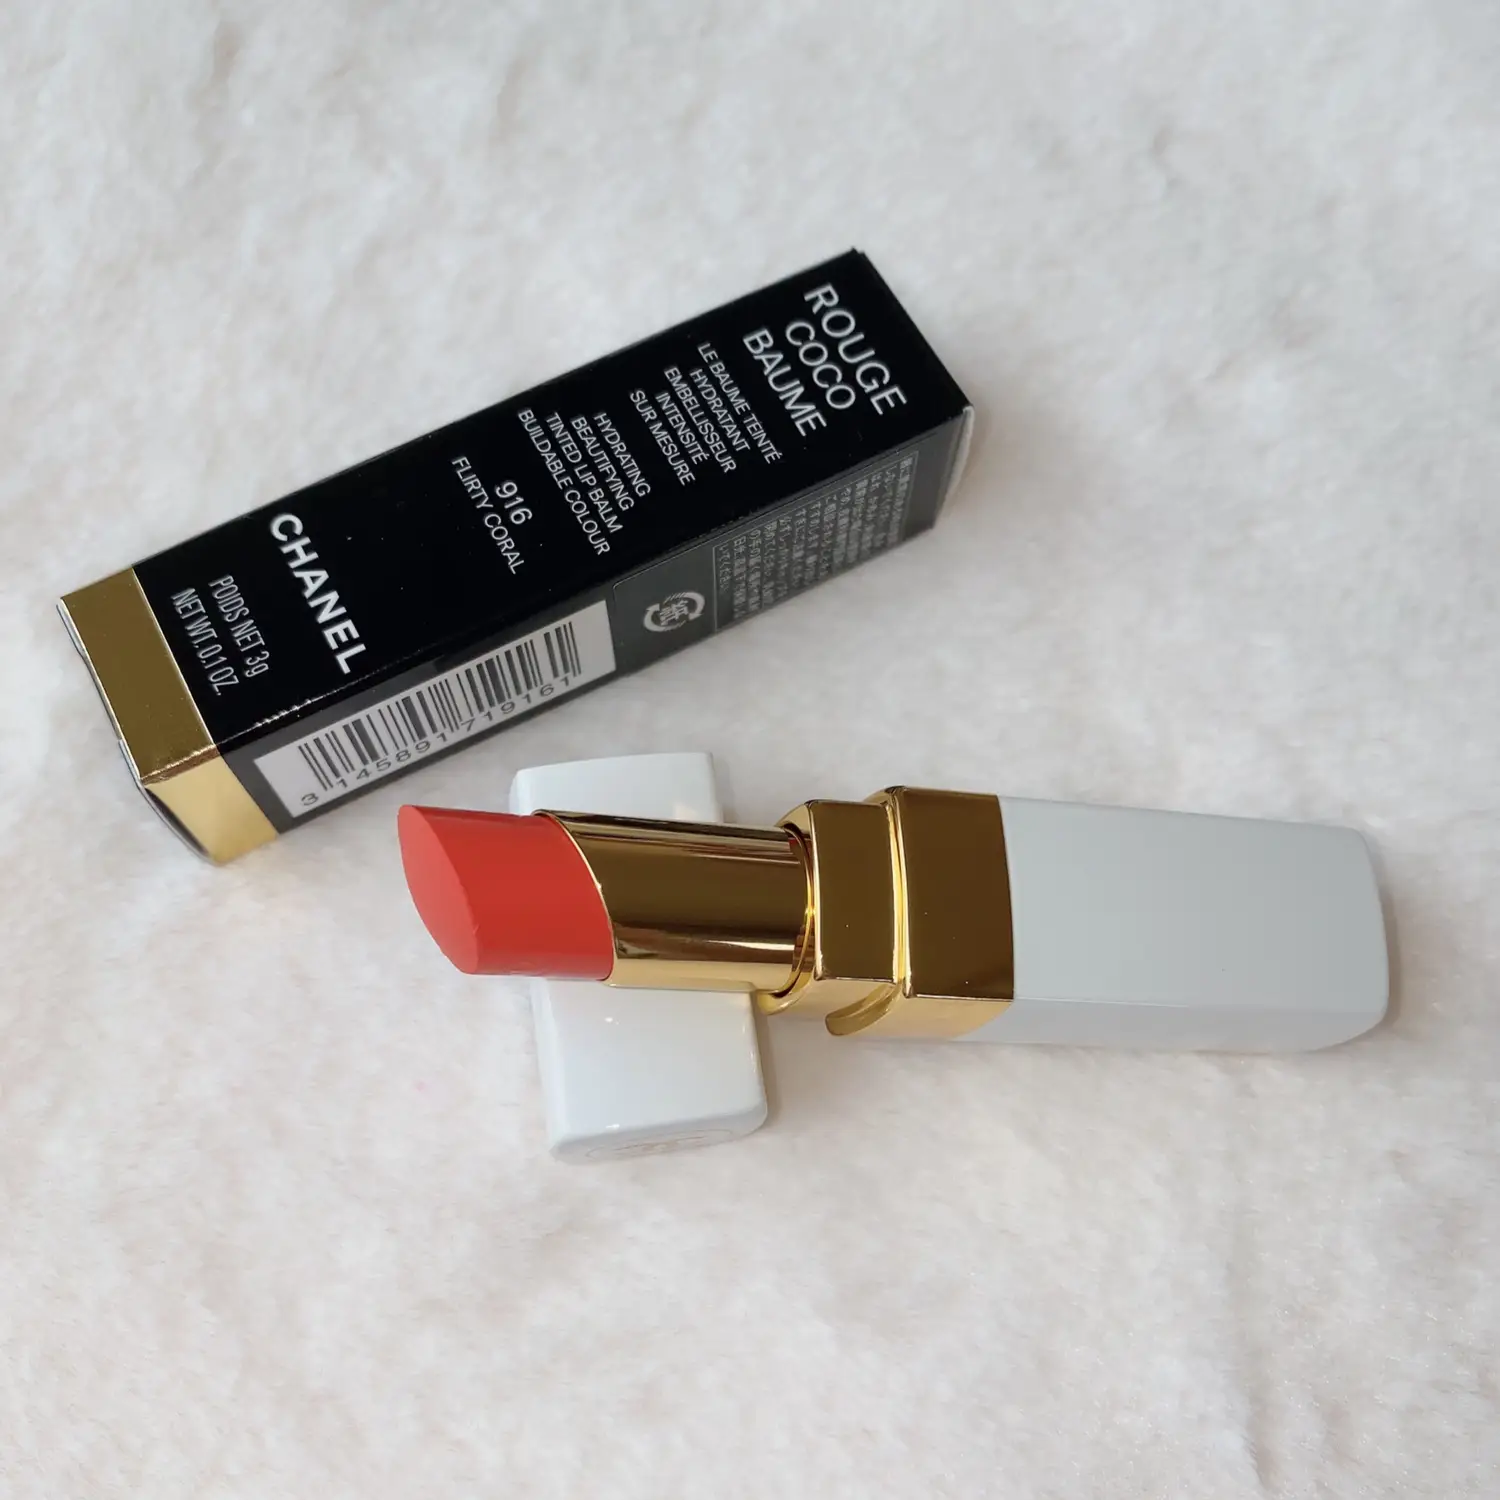 chanel pink delight lipstick